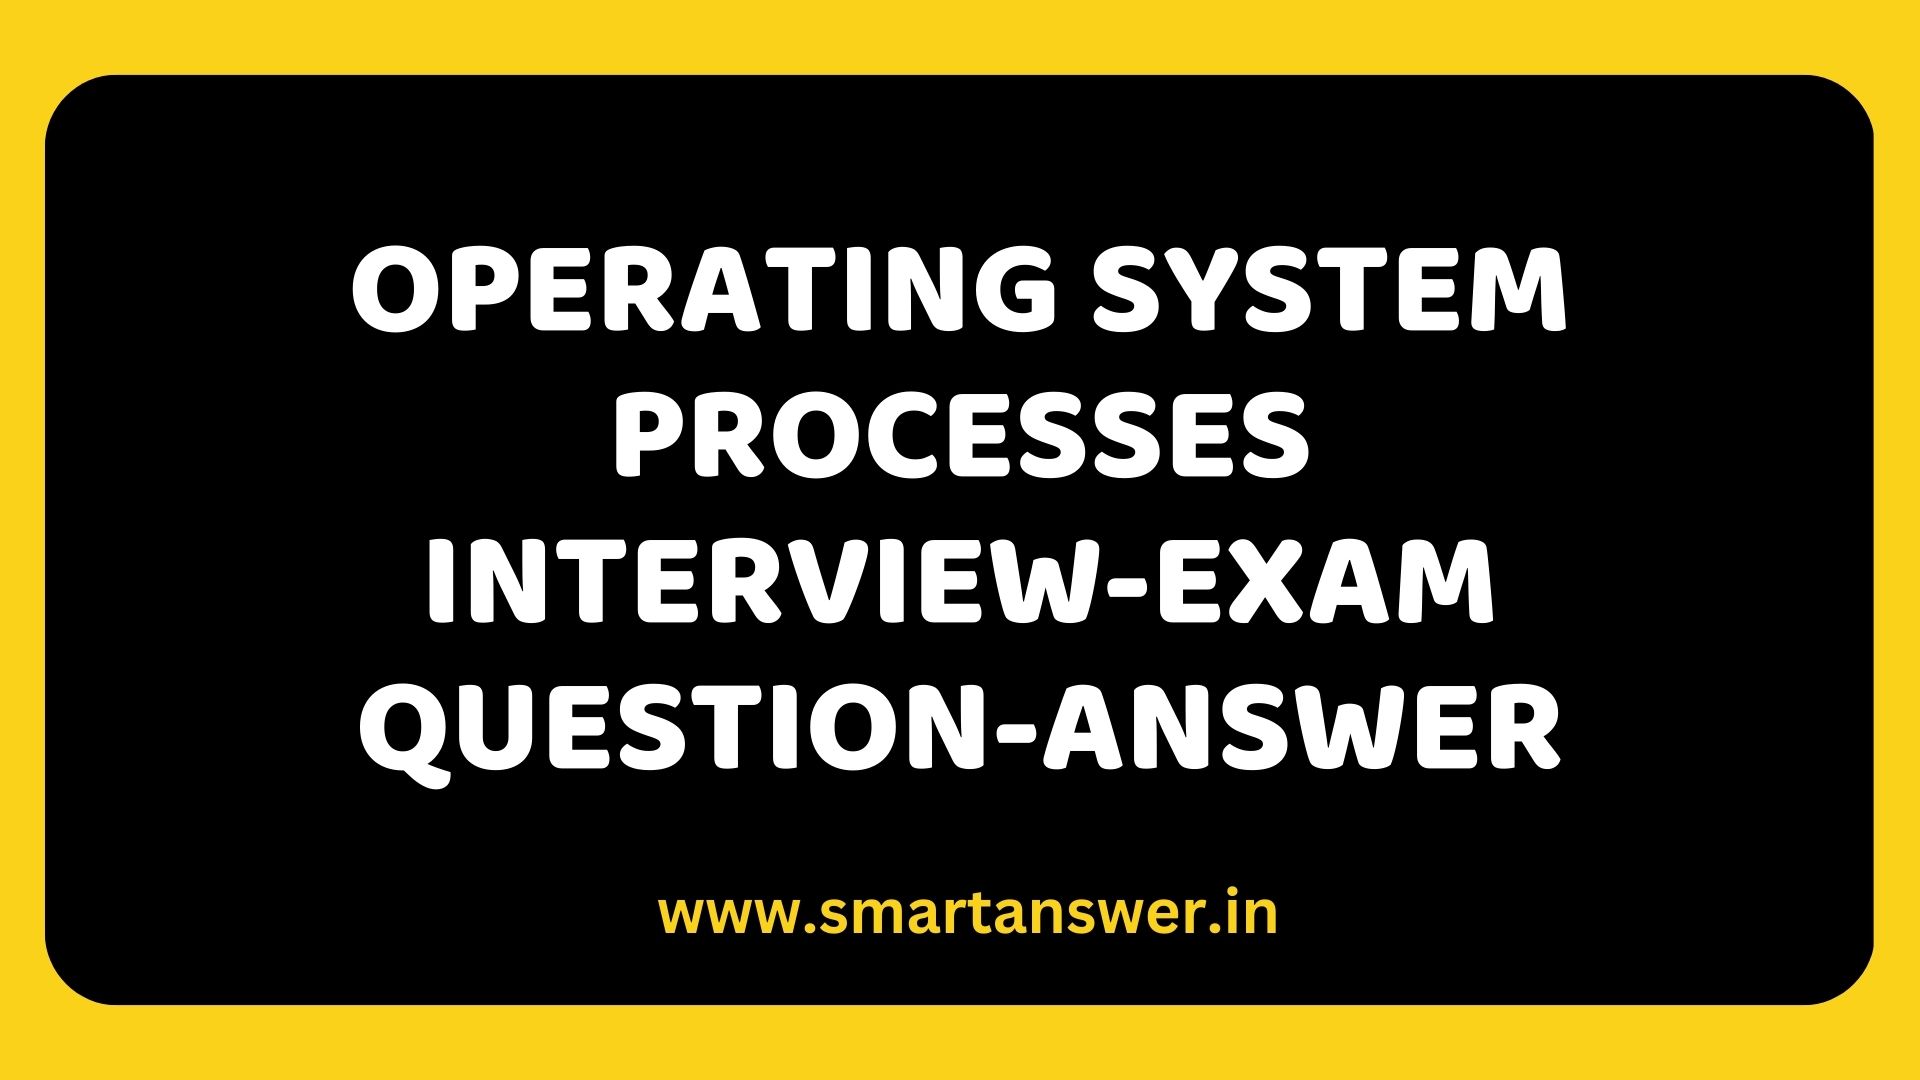 Operating System Processes MCQ (Interview-Exam) Question-Answer